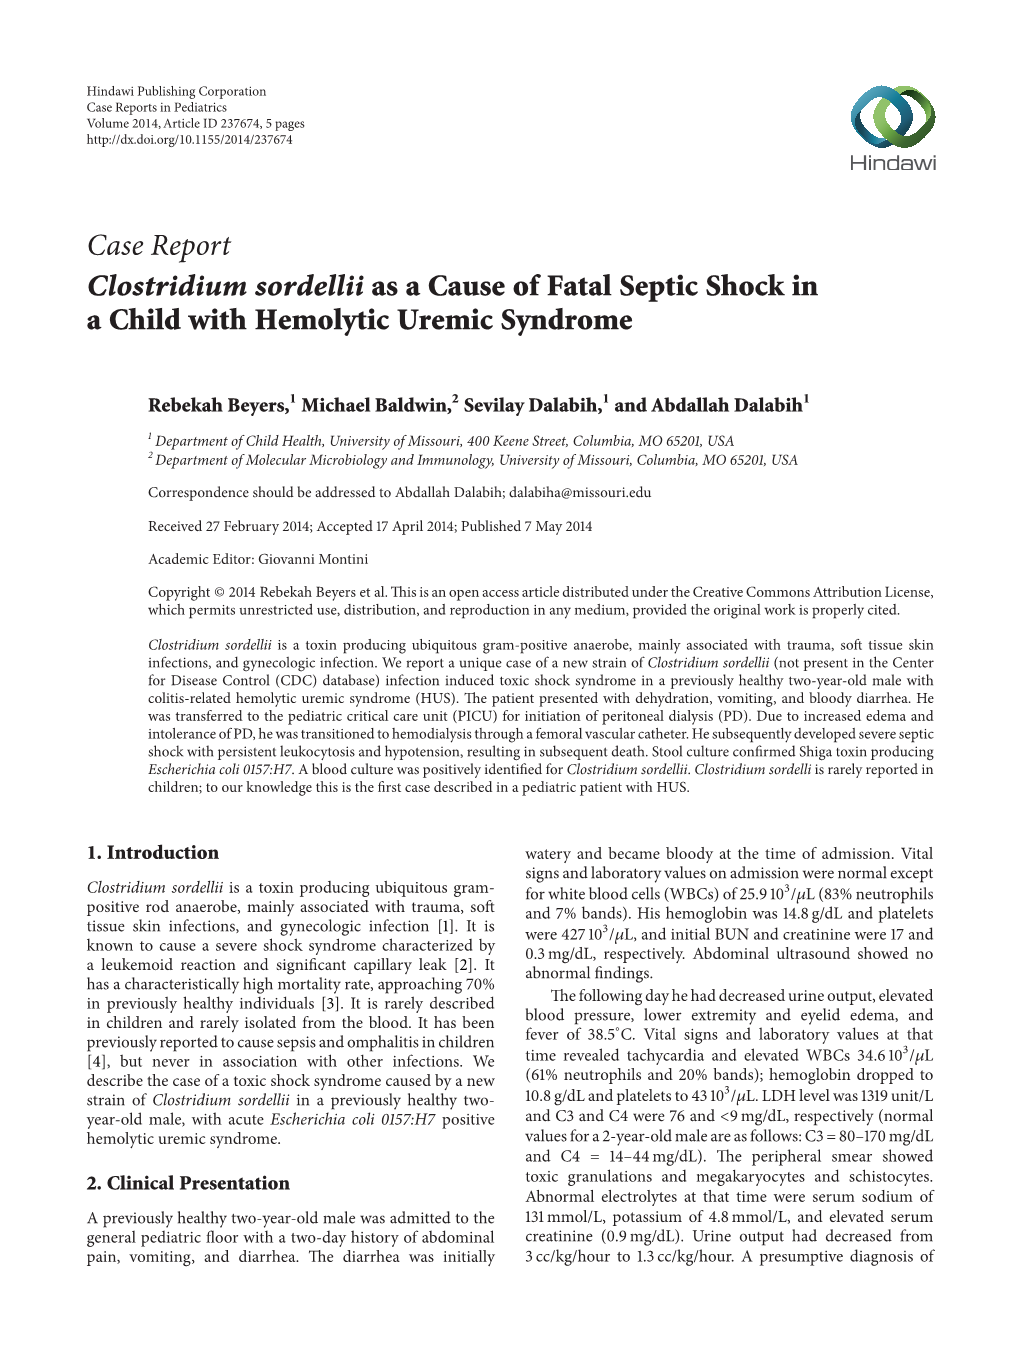 Clostridium Sordellii As a Cause of Fatal Septic Shock in a Child with Hemolytic Uremic Syndrome